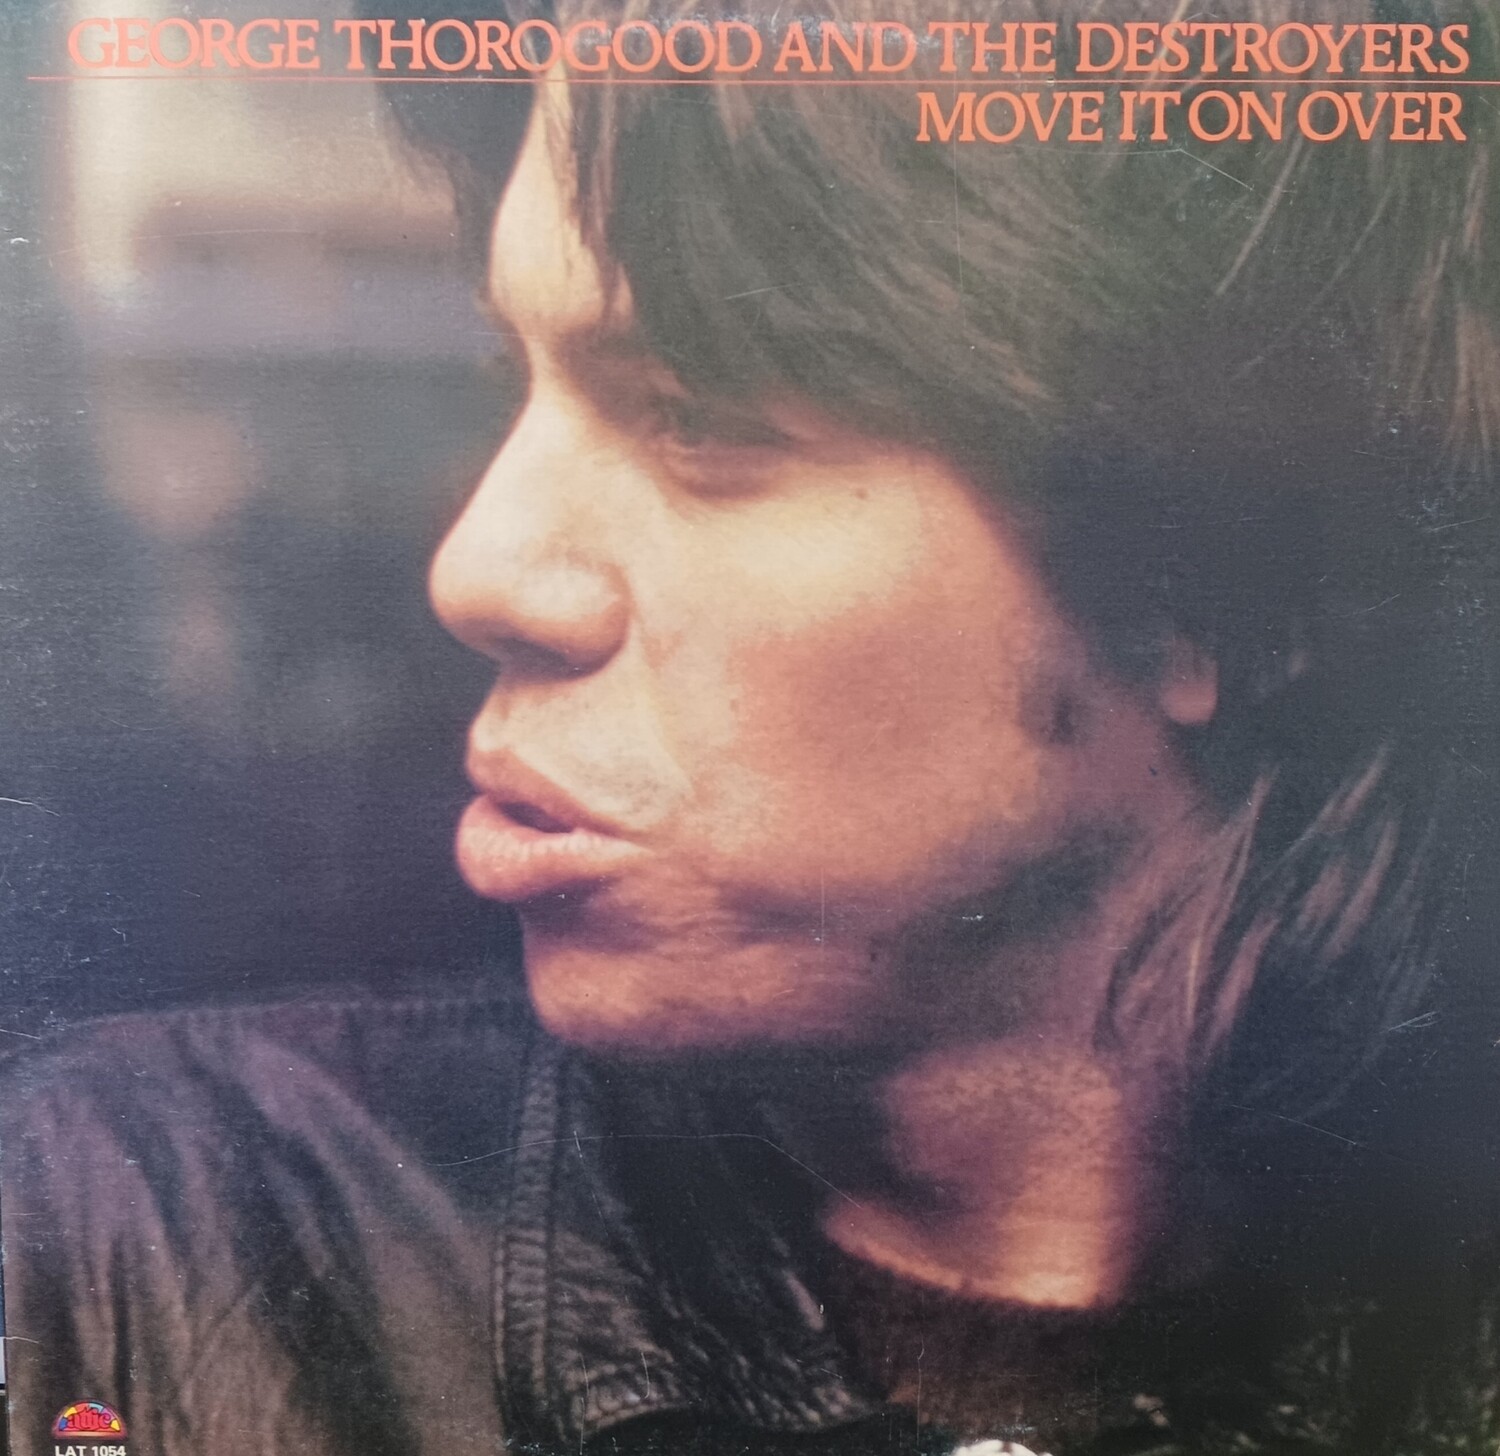 GEORGE THOROGOOD AND THE DESTROYERS - Move it on over